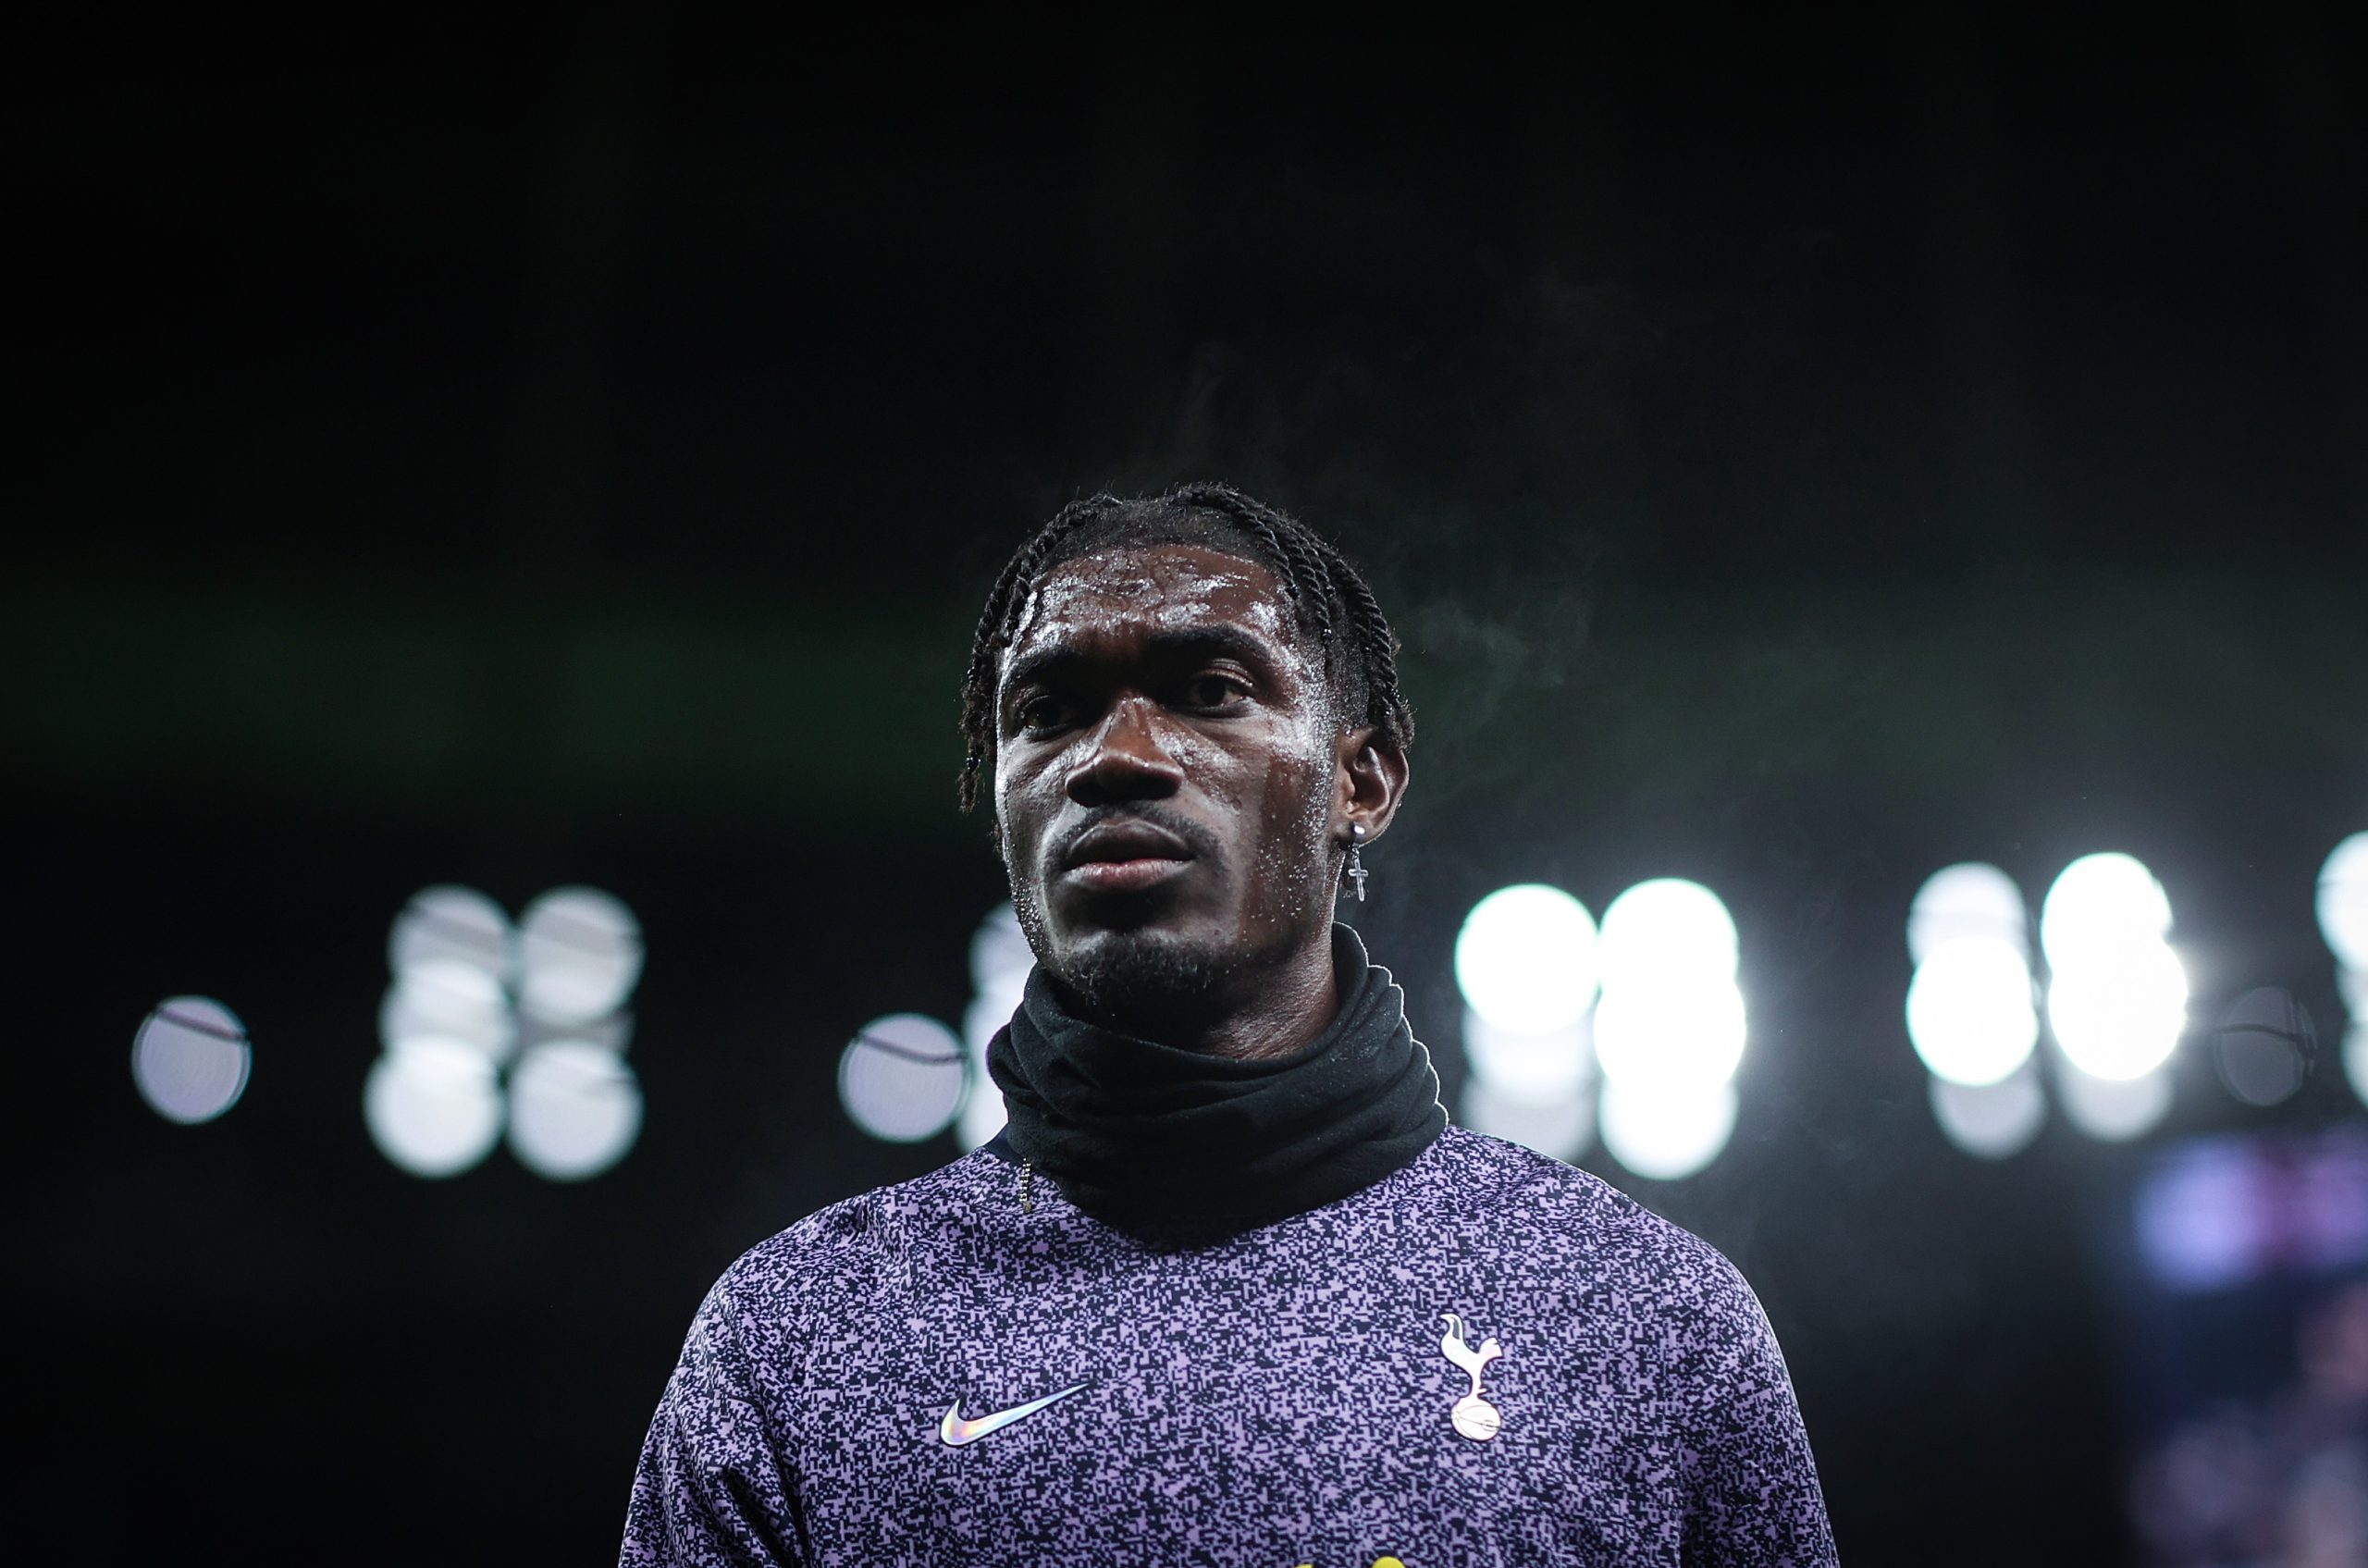 Yves Bissouma remains confident that Tottenham Hotspur are on the right track to glory.